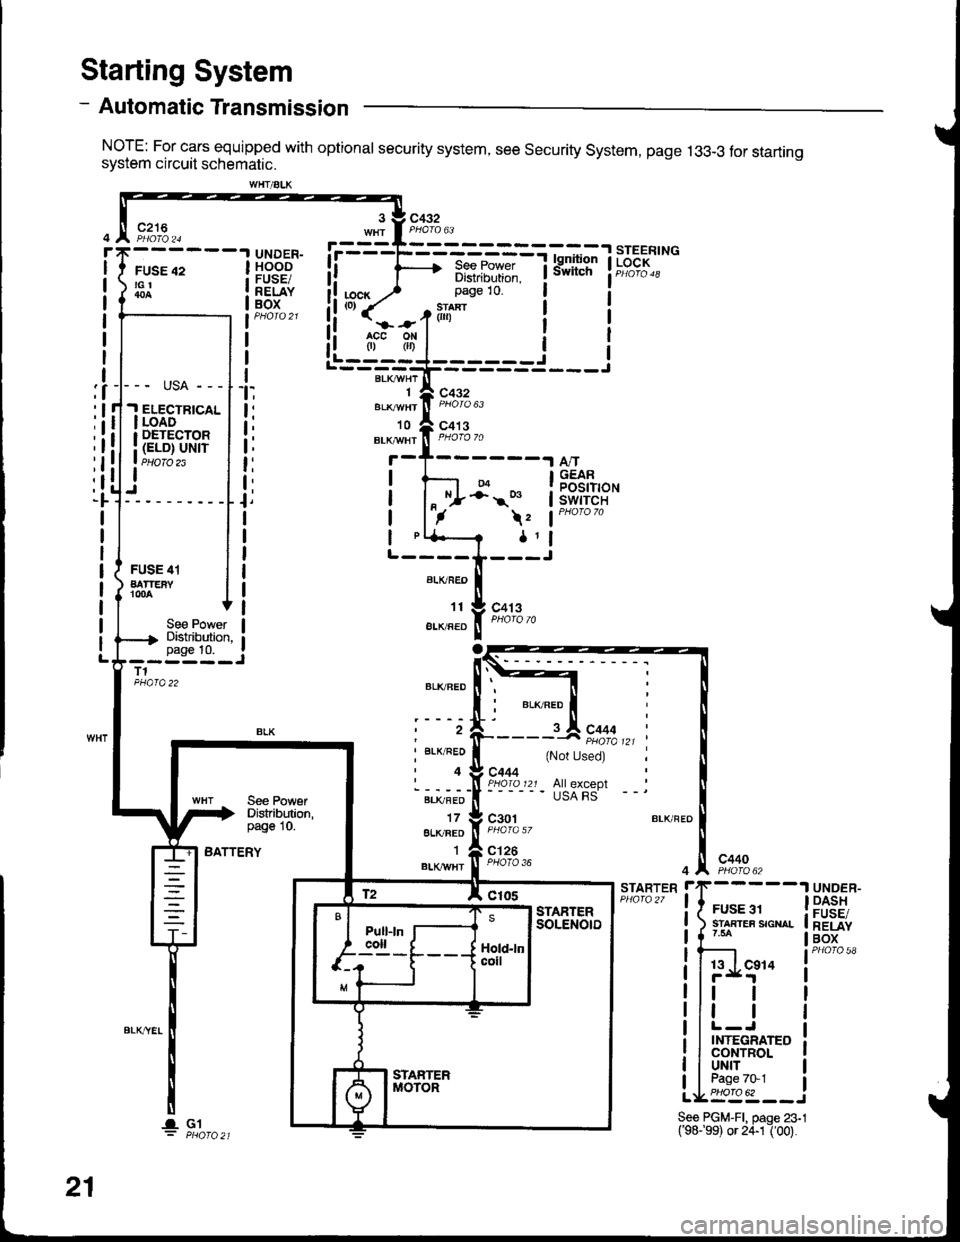 HONDA INTEGRA 1998 4.G Workshop Manual - Automatic Transmission
NorE: For cars equipped with optional security system, see security system, page 13g-3 tor startrngsystem circuit schematic.
Starting System
c216
FUSE 42tGt
UNDER-HOODFUSE/REL